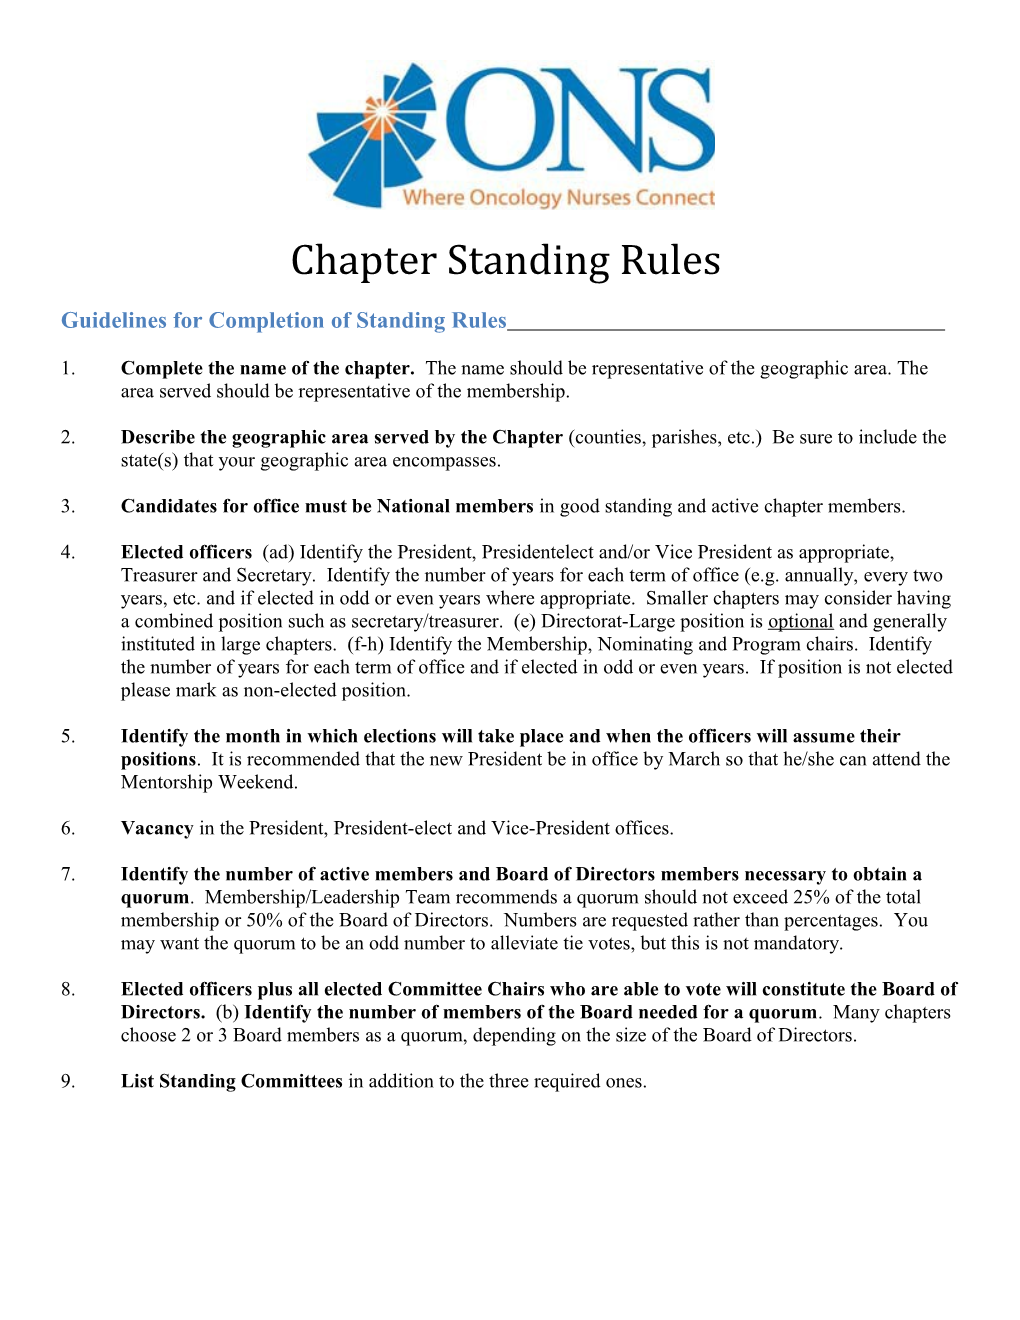 Guidelines for Completion of Standing Rules